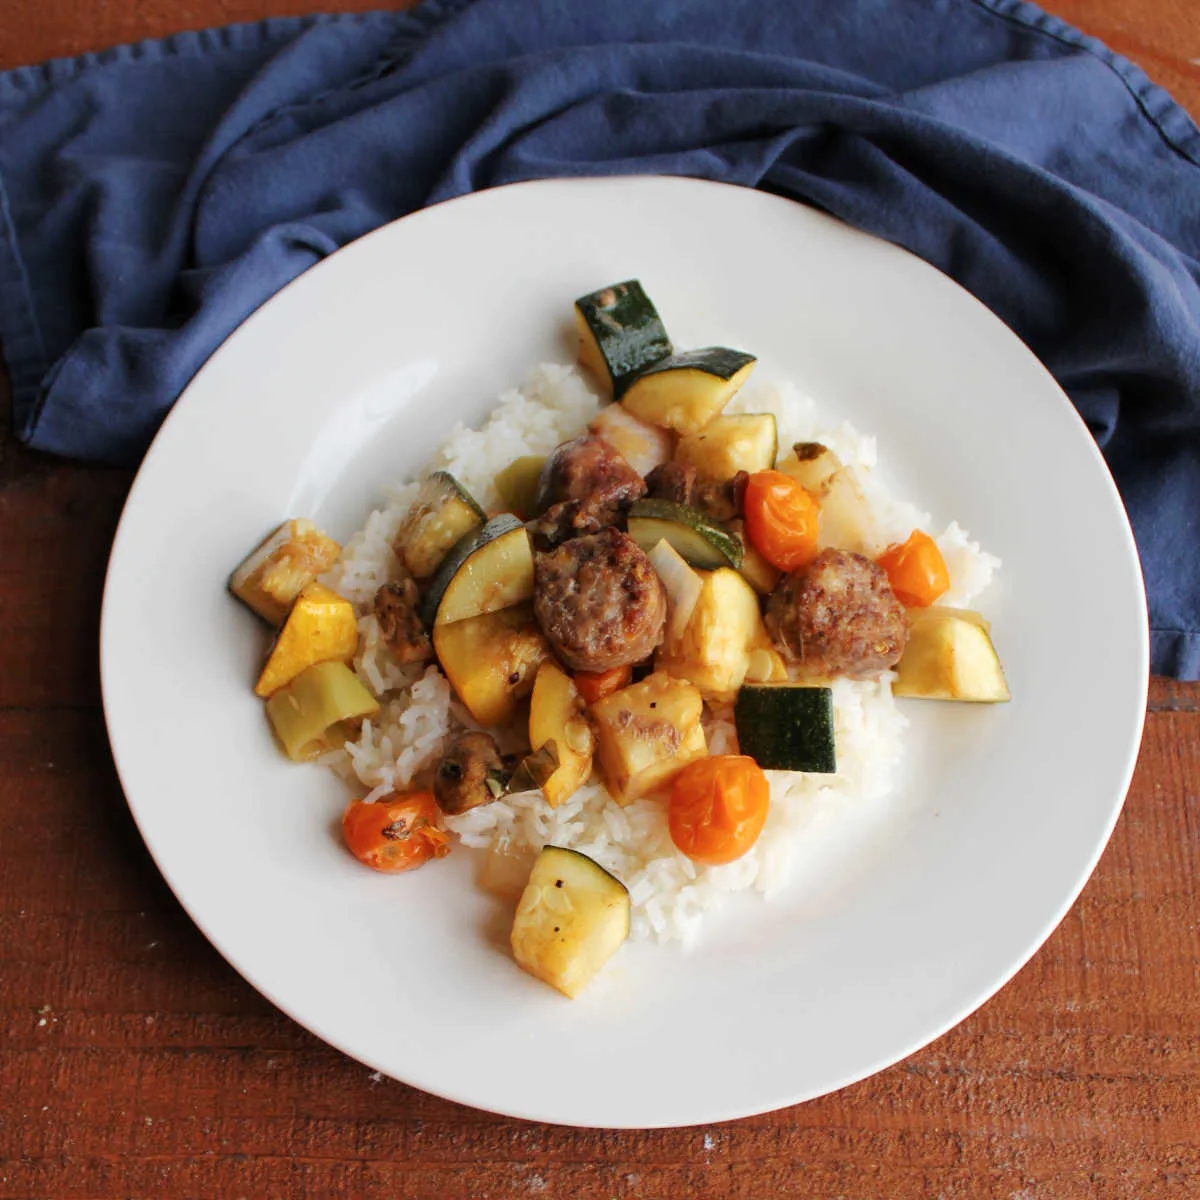 Dinner plate with rice under roasted Italian sausage chunks and vegetables including zucchini, yellow squash, cherry tomatoes, and more.